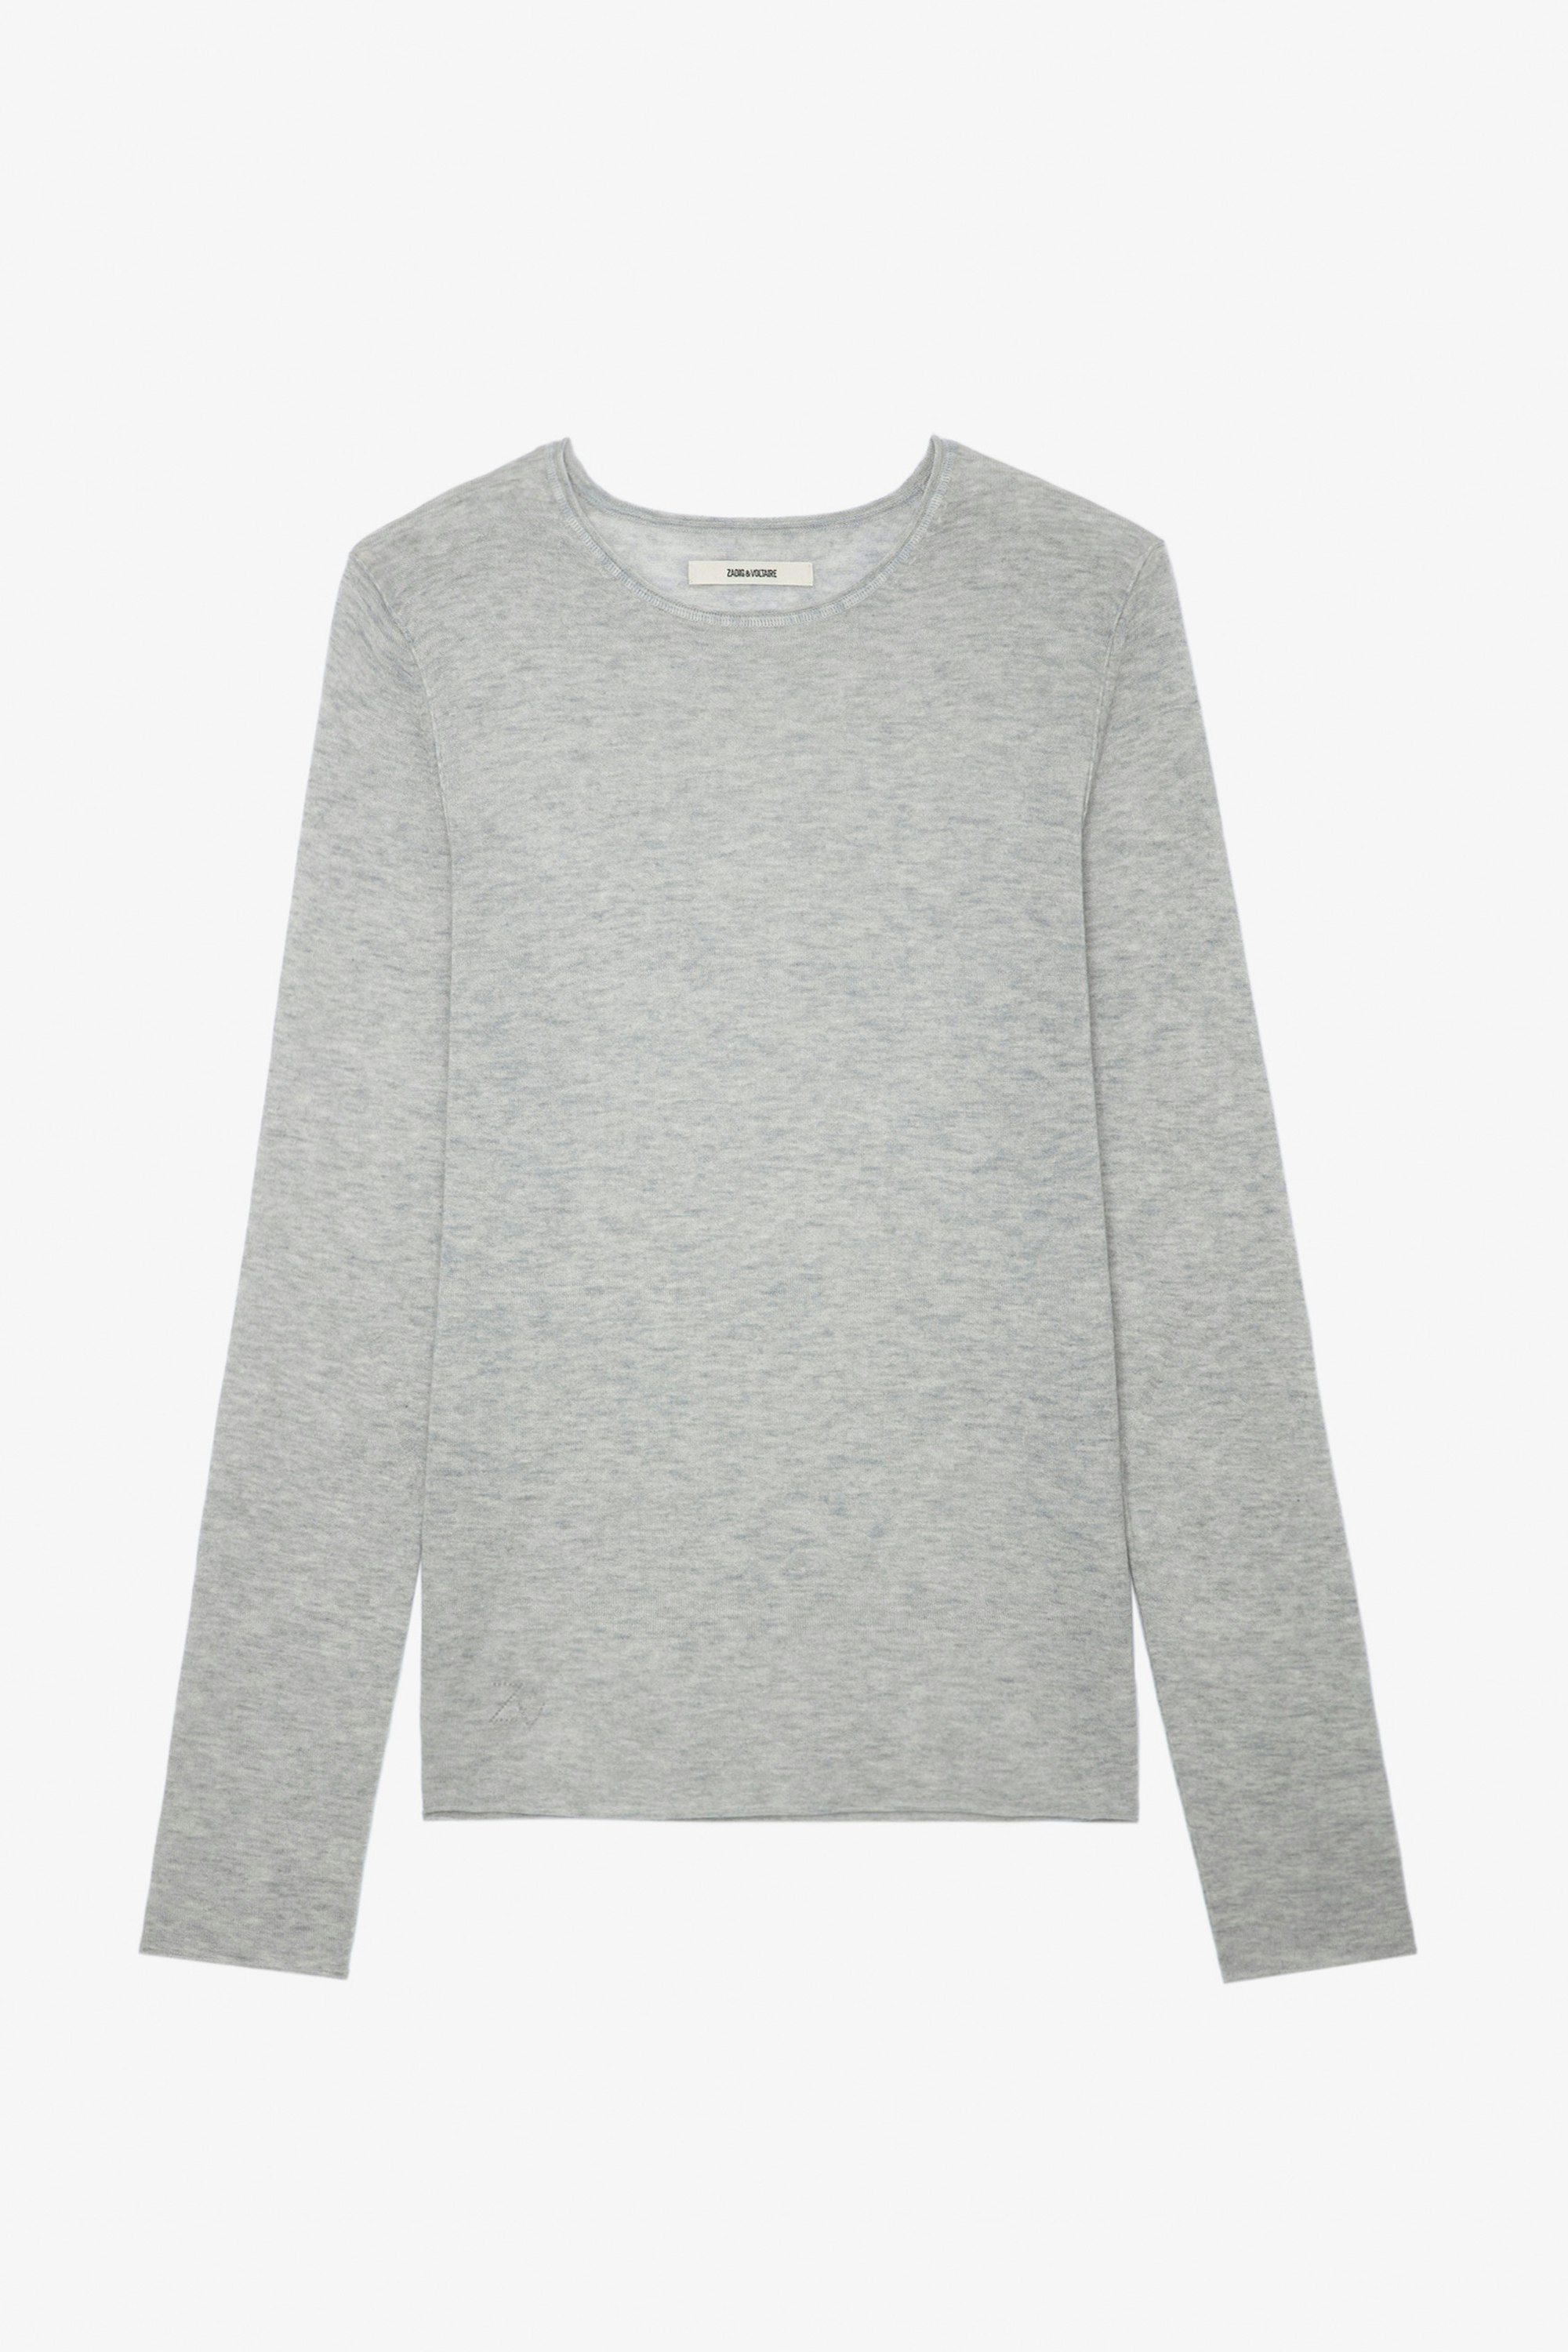 Pull Teiss Cachemire - Pull en cachemire plume gris.